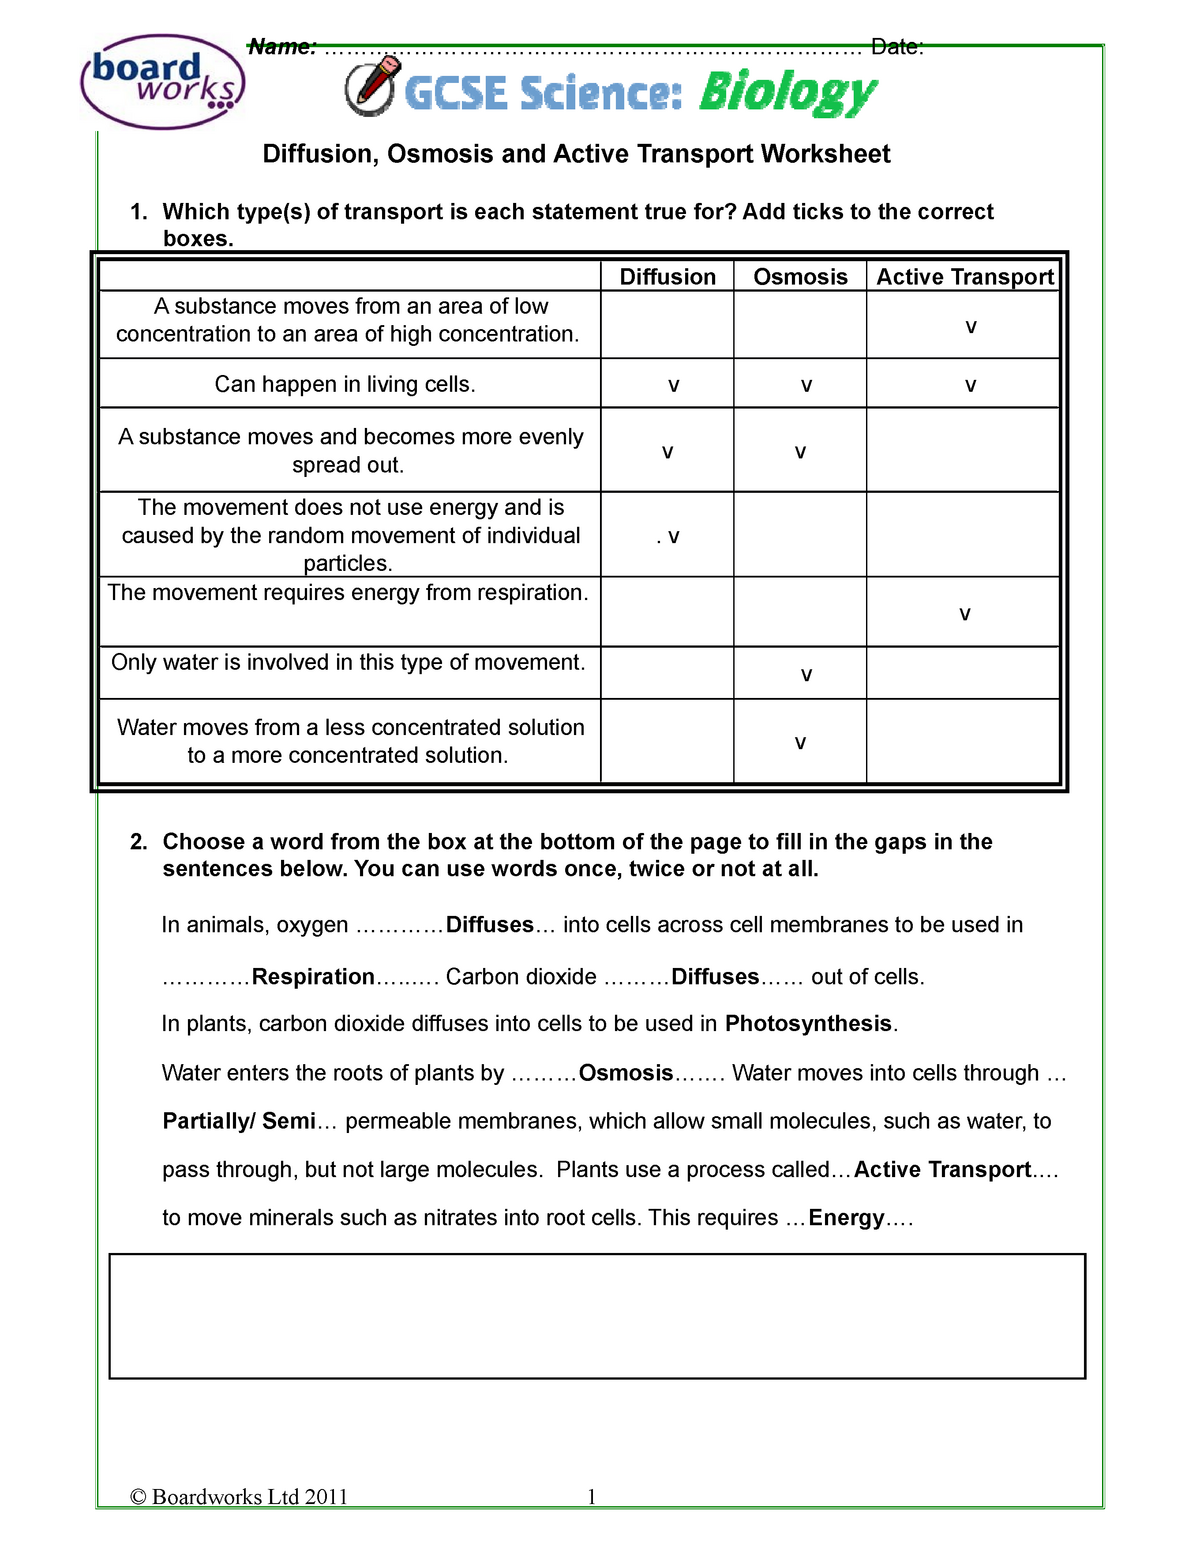 Diffusion Osmosis and Active Transport Worksheet F24 - BP 24 With Regard To Cell Transport Worksheet Biology Answers